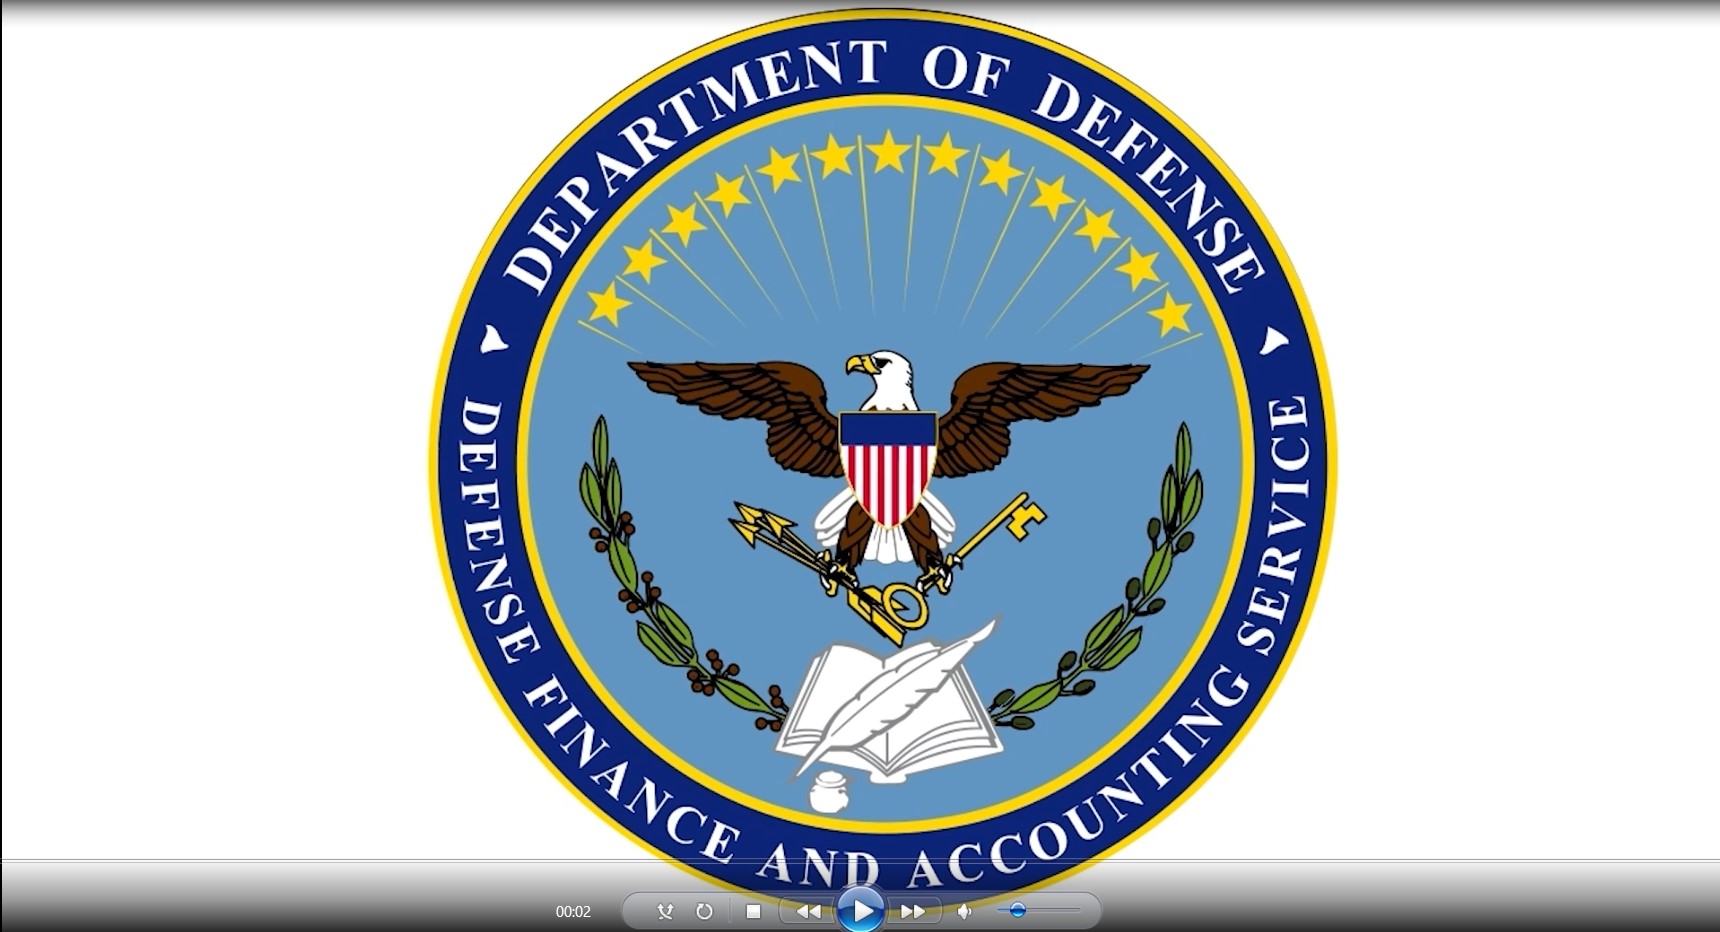 This image is the DFAS Official Seal